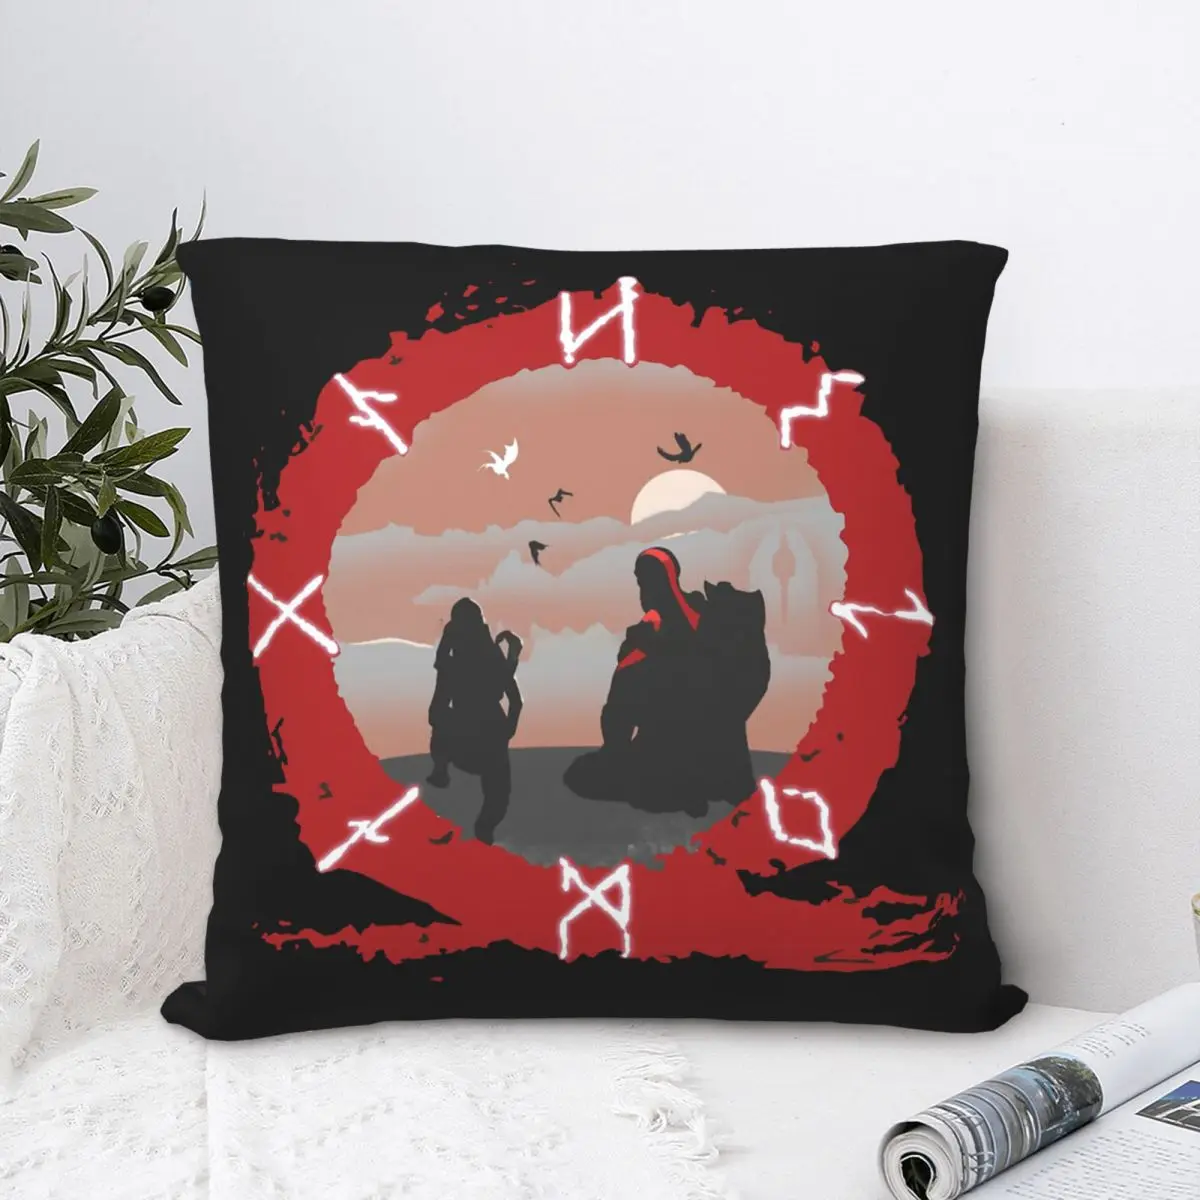 

Father And Son Throw Pillow Case God of War Game Cushion For Home Sofa Chair Decorative Hug Pillowcase